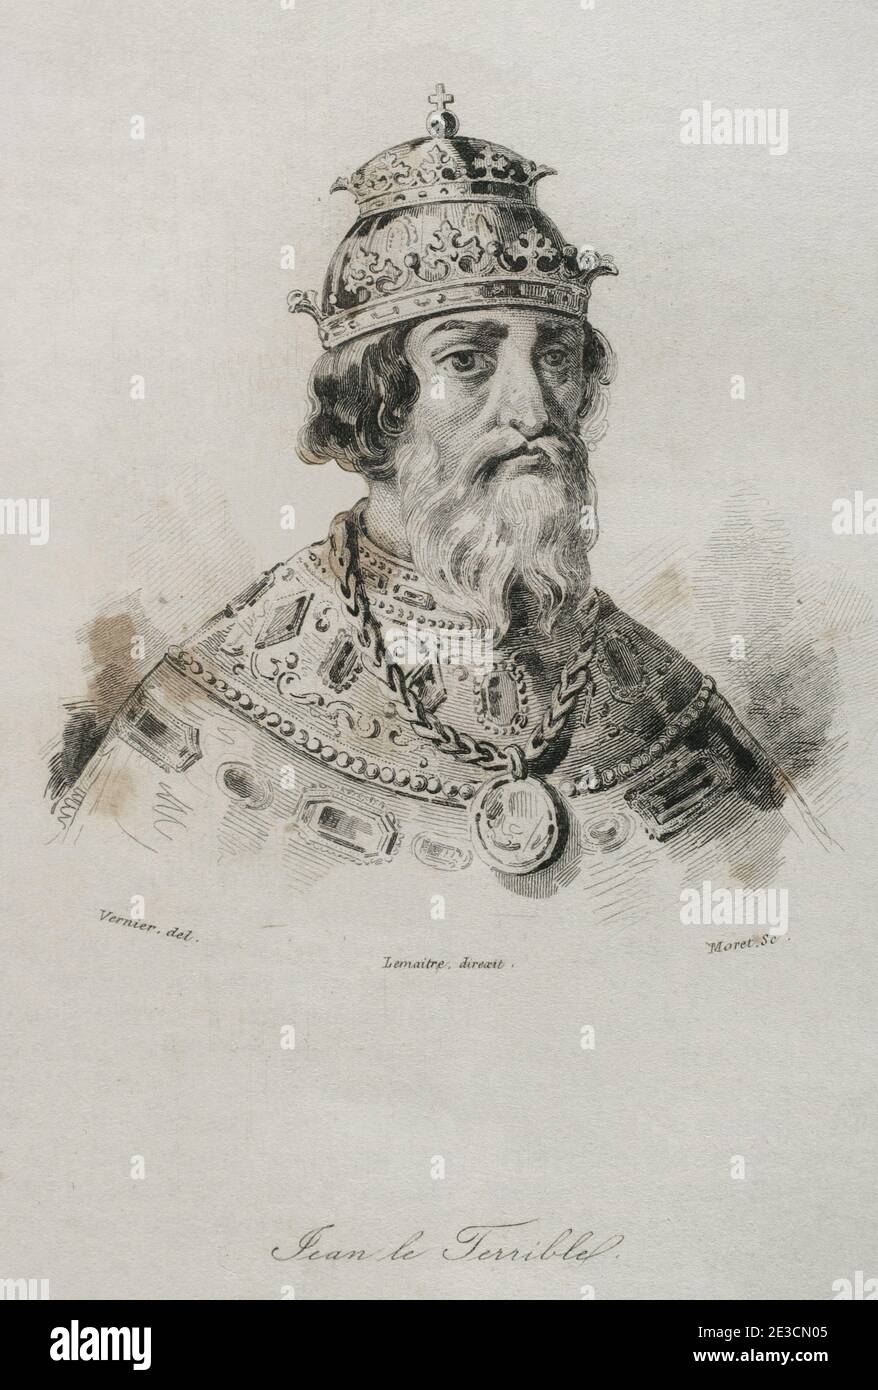 Ivan IV Vasilyevich (1530-1584), known as Ivan the Terrible. Grand Prince of Moscow (1533-1547) and Tsar of All the Russias (1547-1584). Portrait. Engraving by Lemaitre, Vernier and Moret. History of Russia by Jean Marie Chopin (1796-1870). Panorama Universal, Spanish edition, 1839. Stock Photo